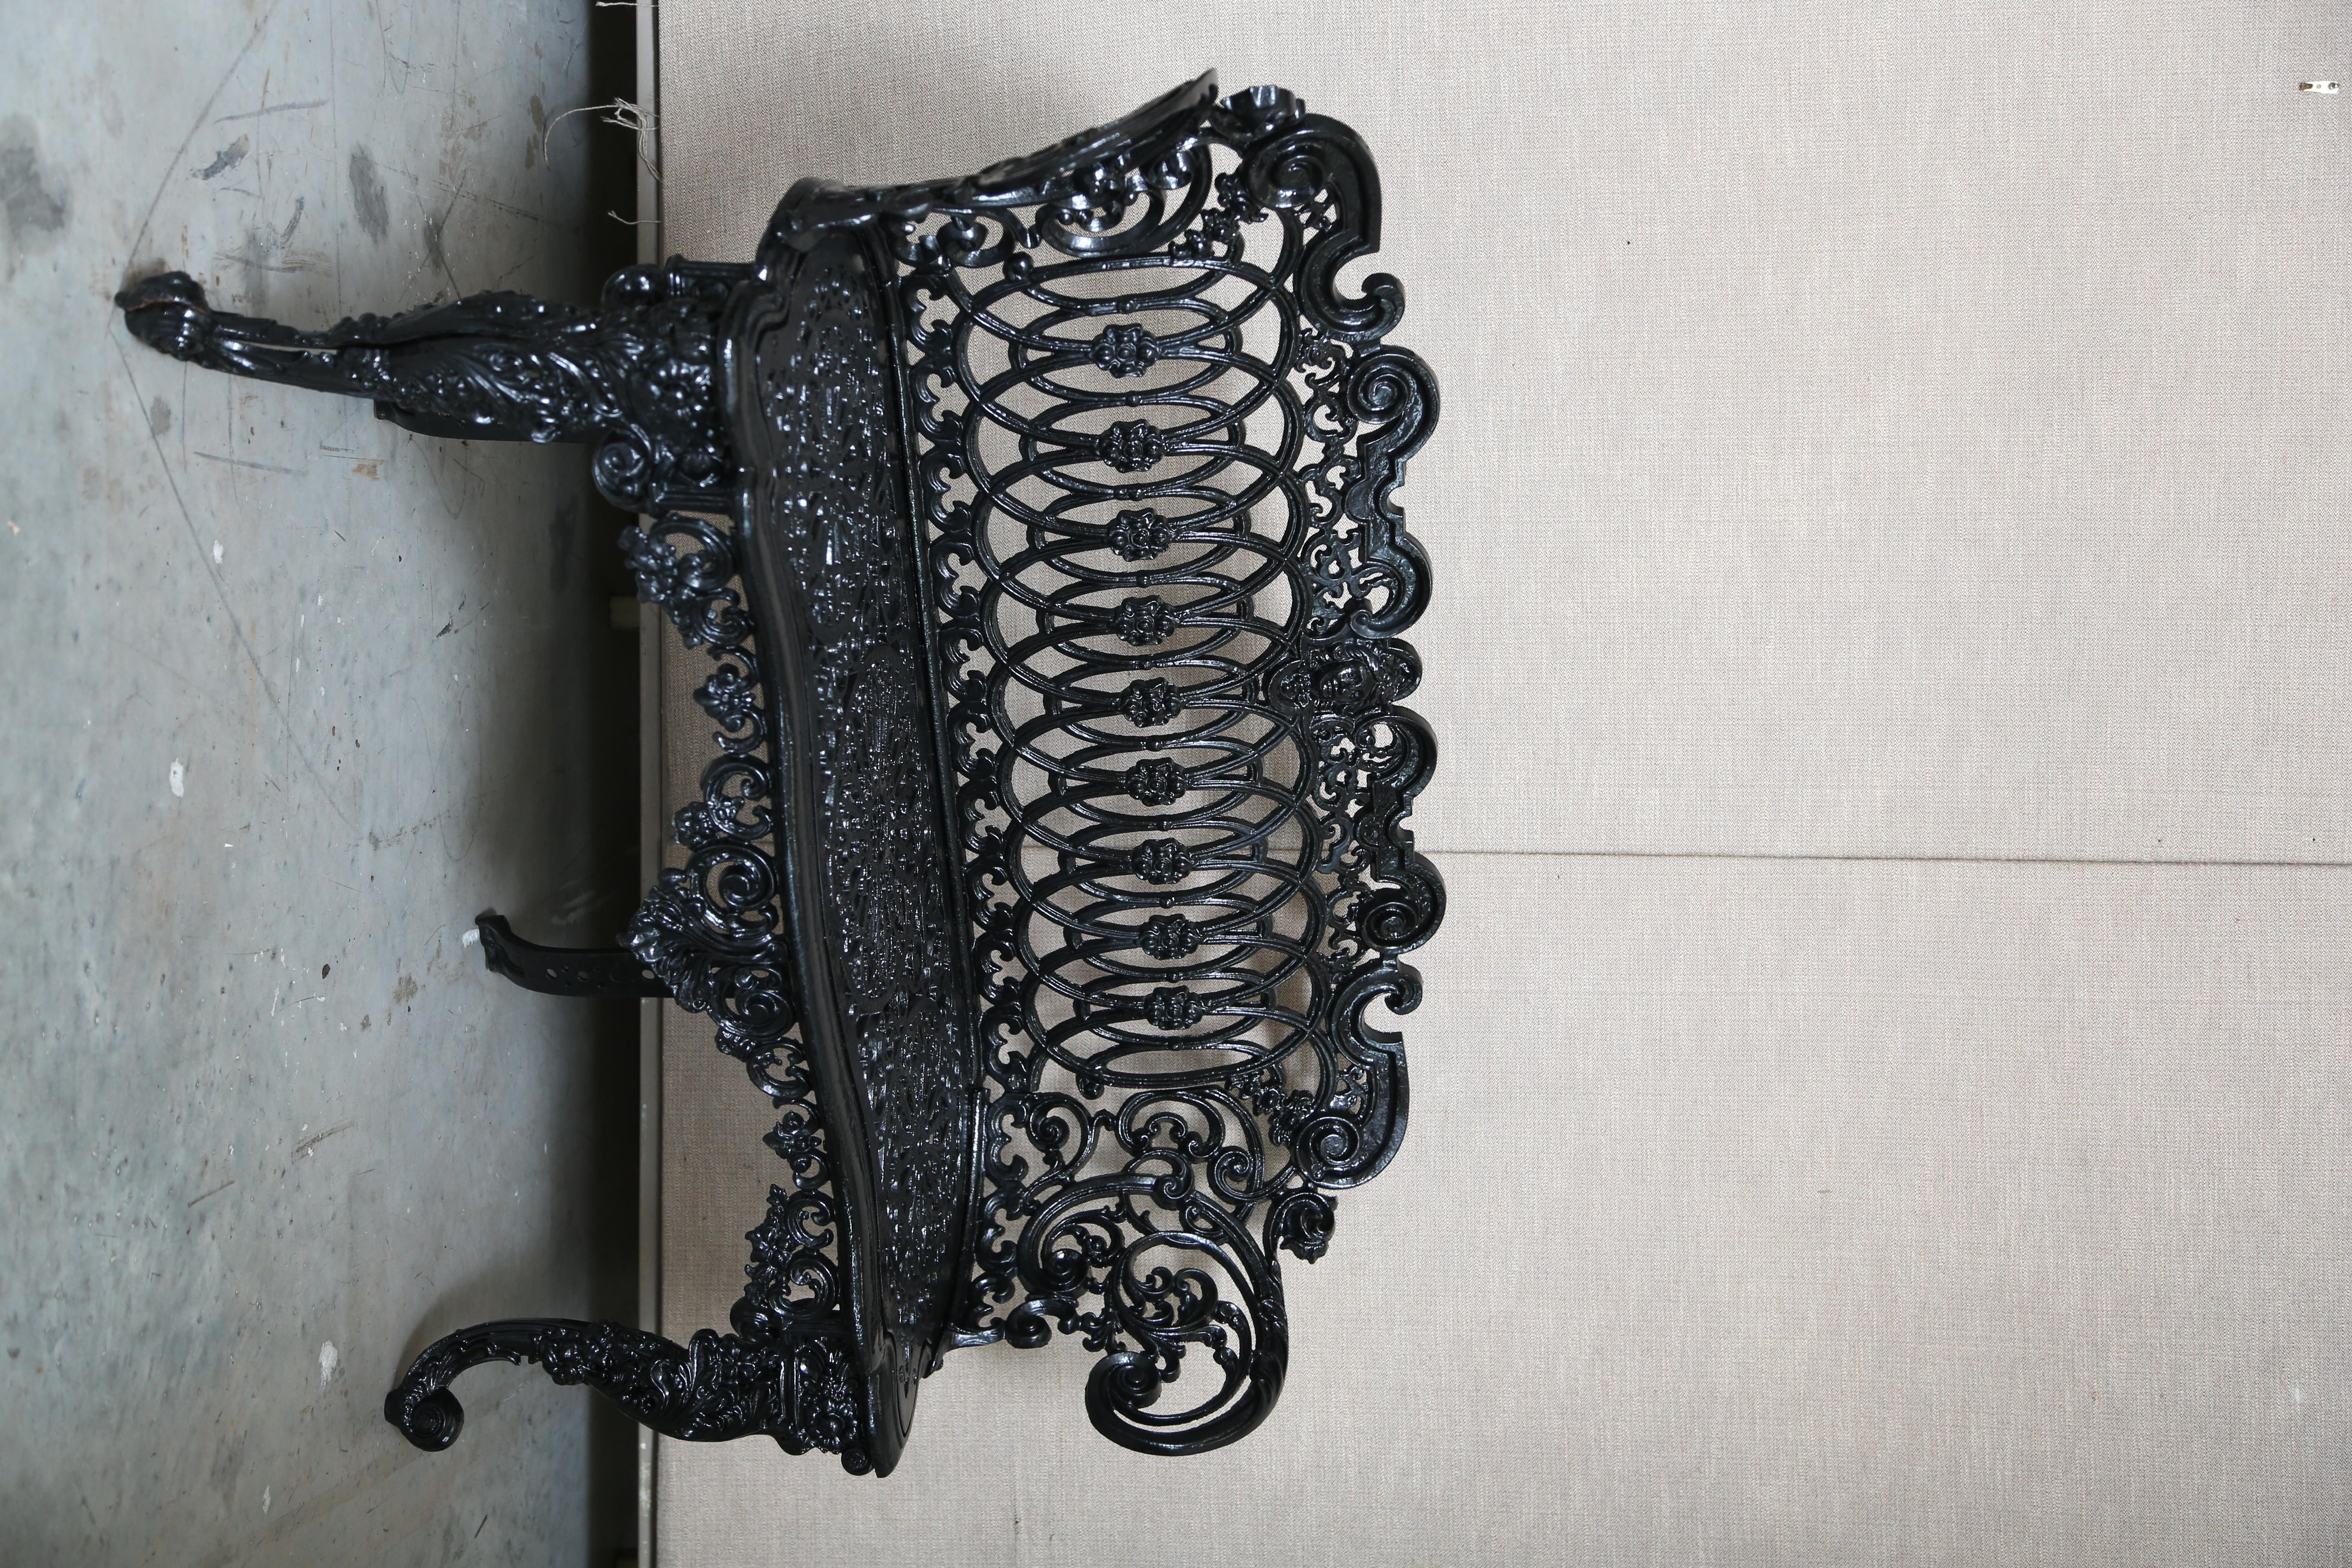 Betsy Ross pattern Victorian cast iron garden bench. The iron work is superb with the face of Betsy Ross in the center back. Rolled arms and scrolled legs define this bench. This pattern is desirable and hard to find. It has been restored and